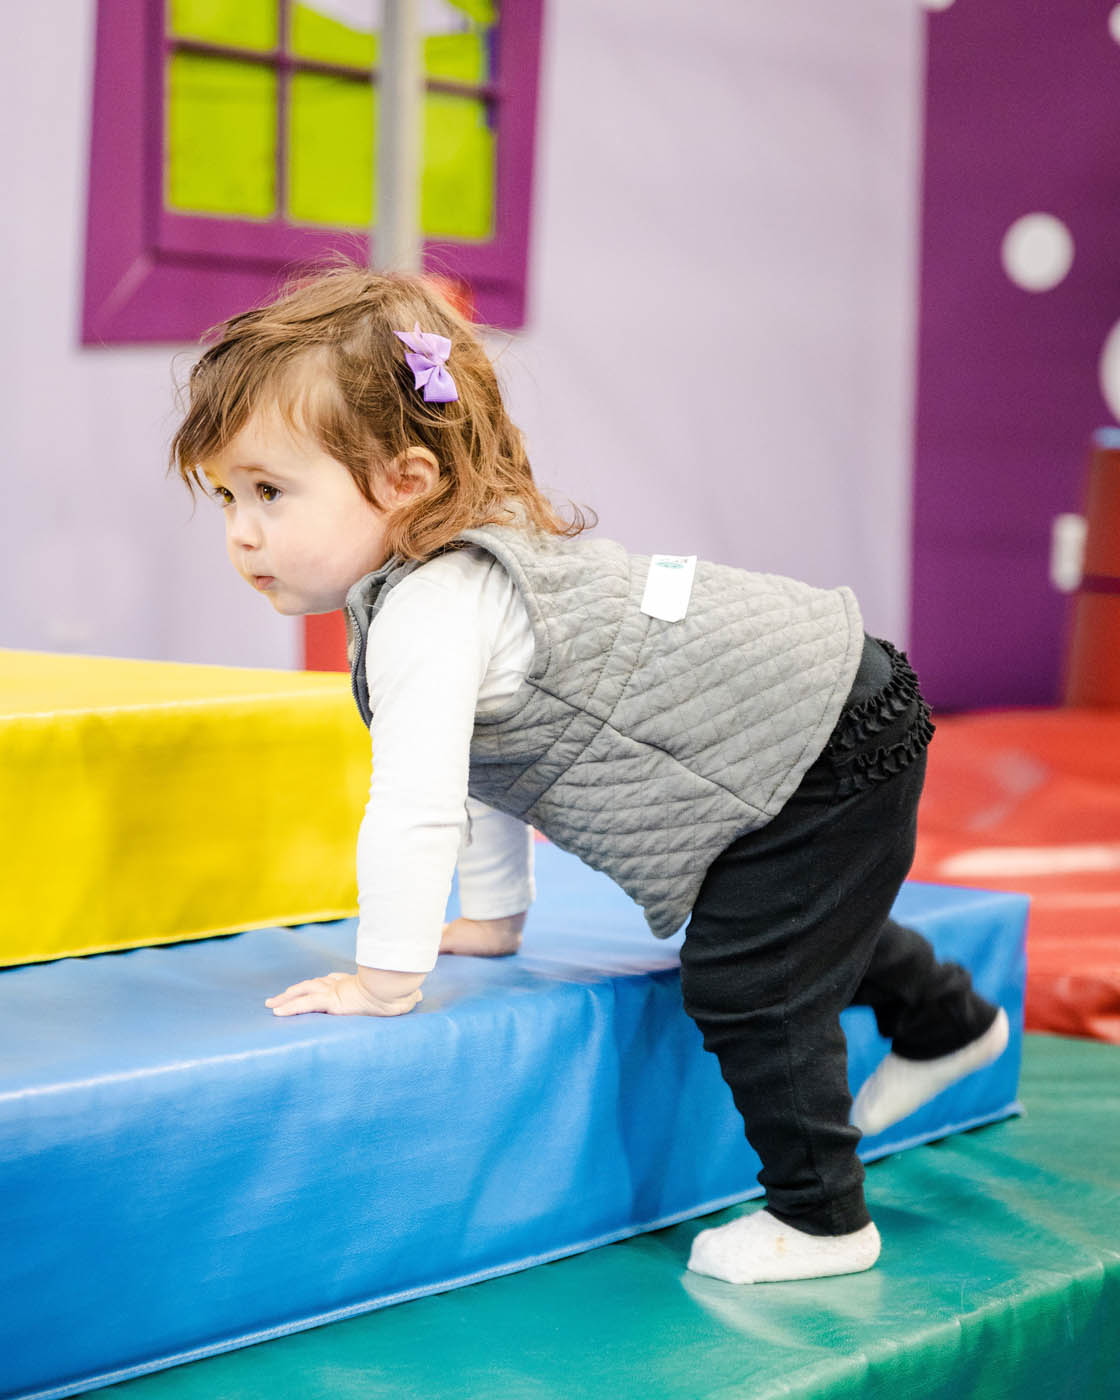 A little girl climbing on soft tumbling equipment for toddlers at Romp n' Roll in St. Petersburg, FL.